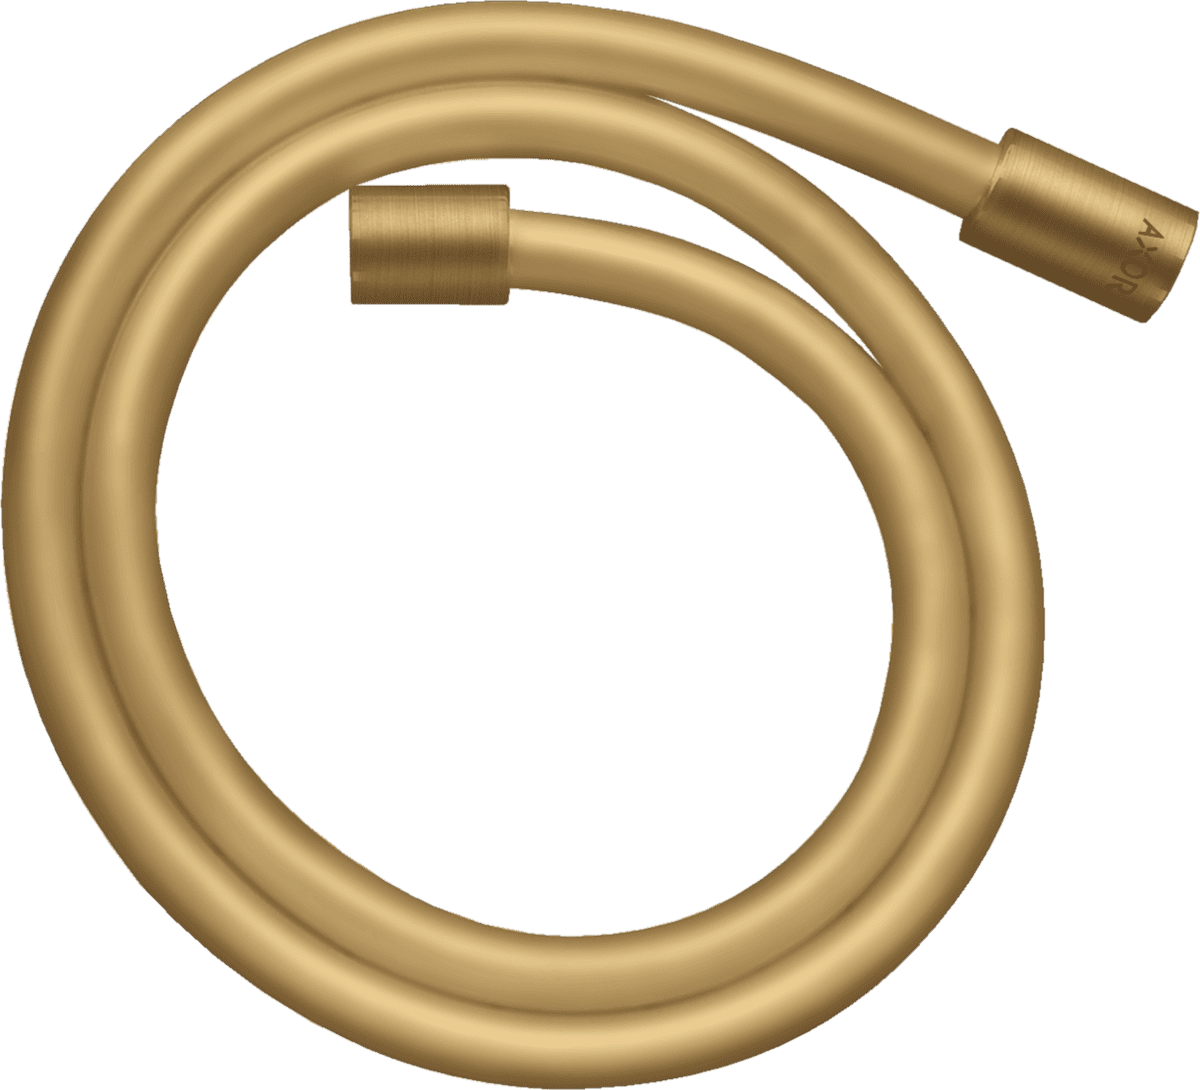 HANSGROHE AXOR Starck Metal effect shower hose 2.00 m with cylindrical nuts #28284250 - Brushed Gold Optic resmi